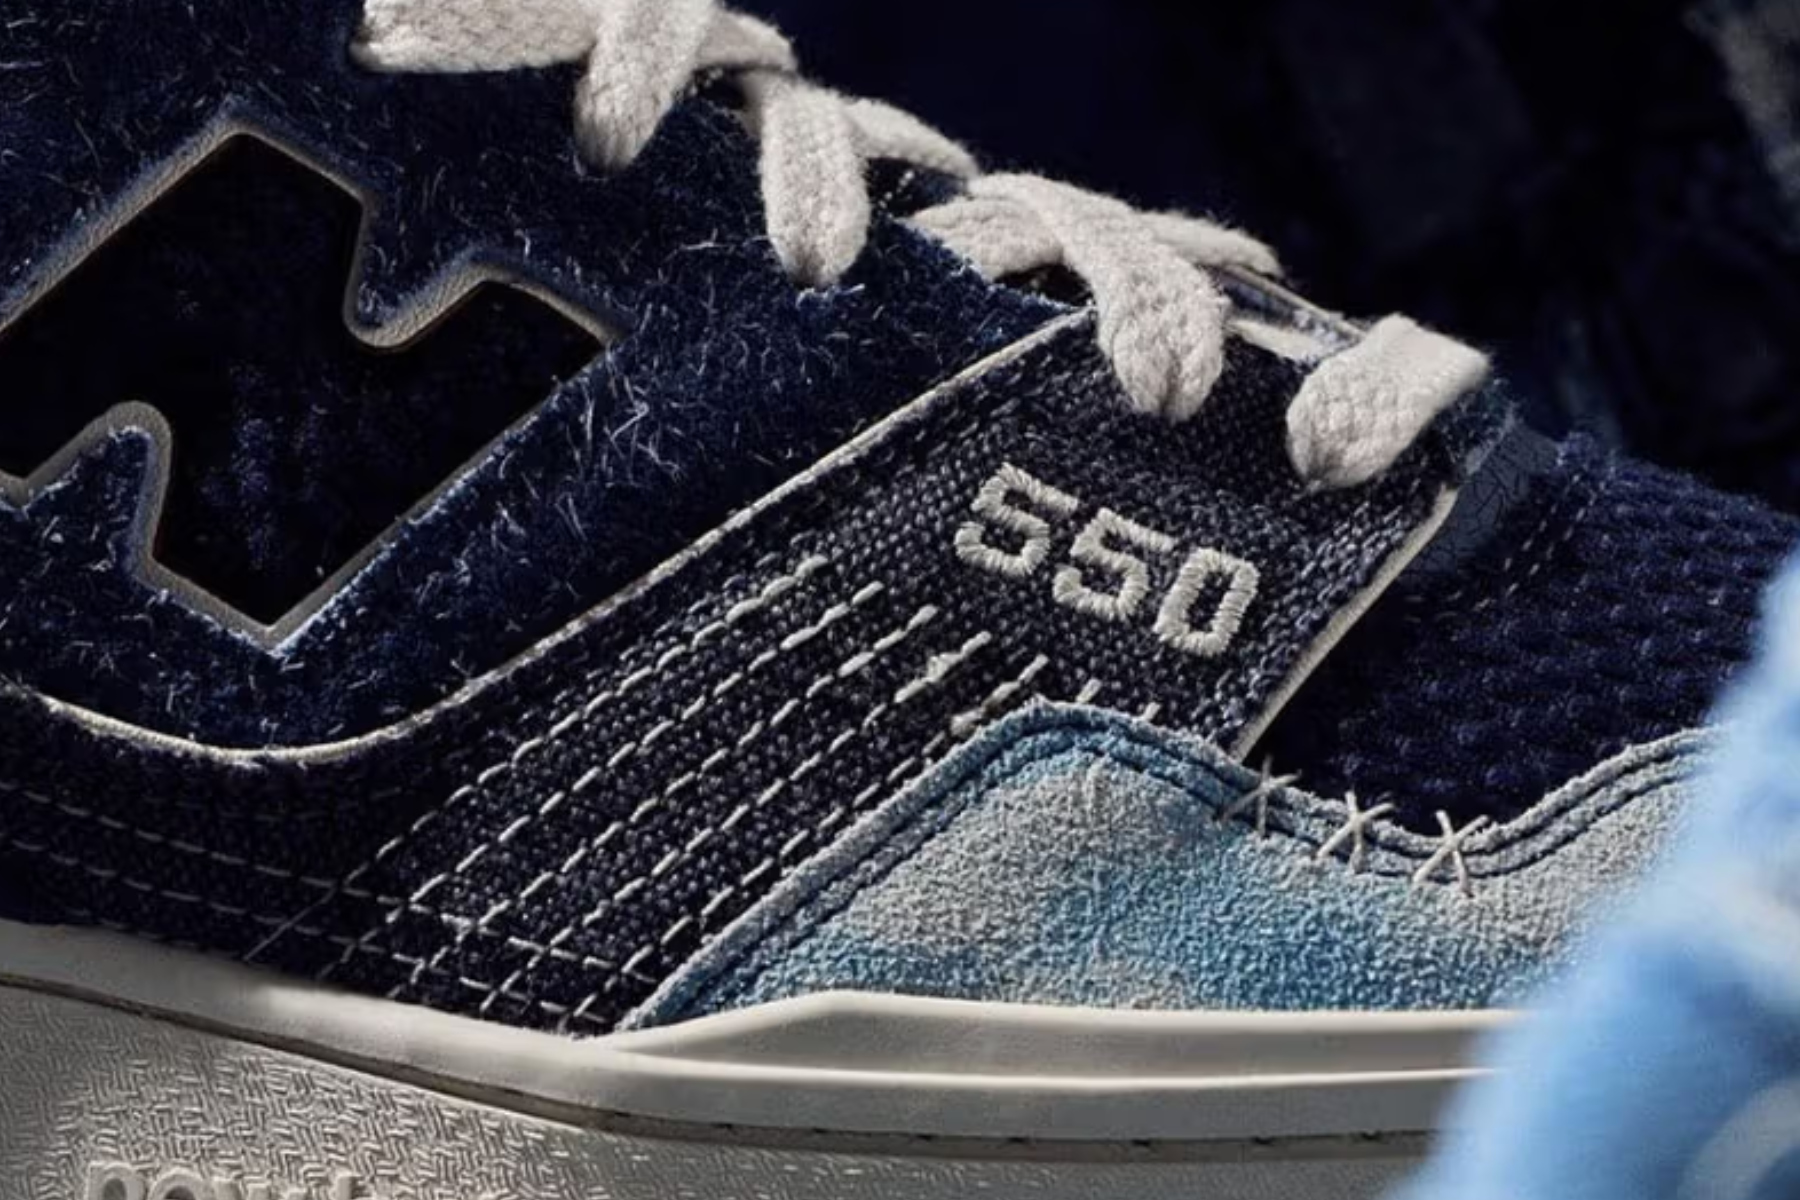 New Balance's denim 550 & 580 sneakers for Fall/Winter 2023.